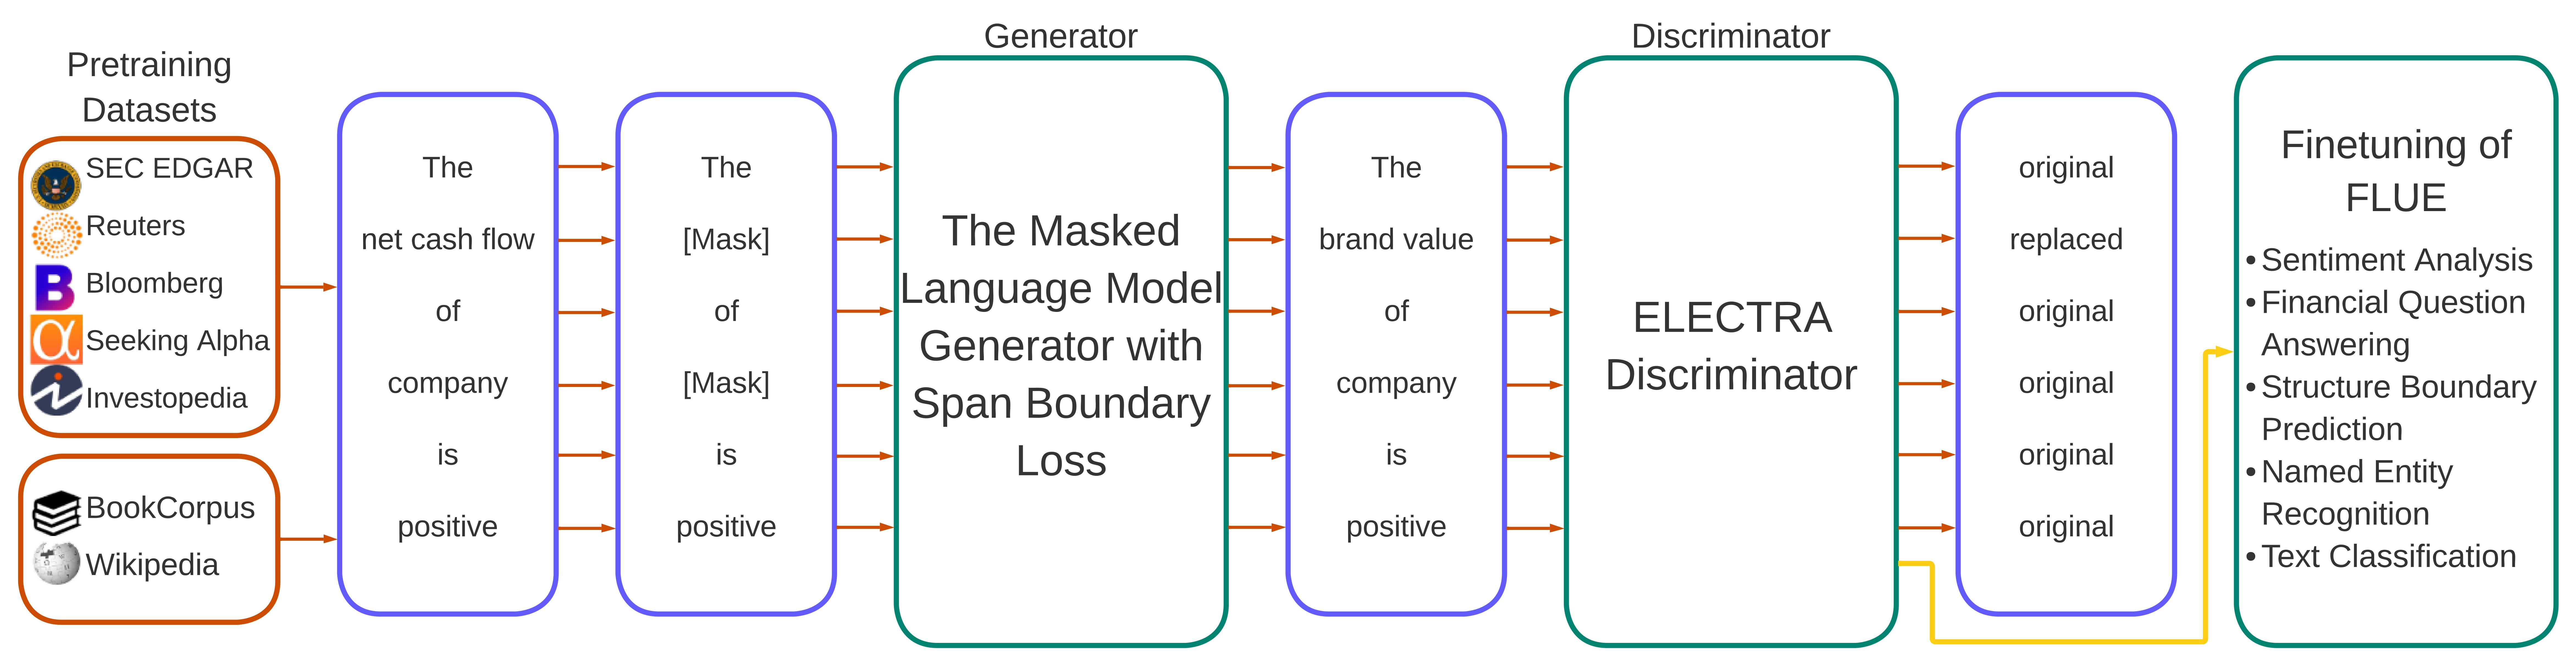 Architecture of our model. We use finance specific datasets and general English datasets (Wikpedia and BooksCorpus) for training the model. We follow the training strategy of ELECTRA with span boundary task which first predicts masked tokens using language model and then uses a discriminator to assess if a token is original or replaced. The generator and discriminator are trained end-to-end, and both words and phrases from financial vocabulary are used for masking. The final discriminator is then fine-tuned on individual tasks on our contributed benchmark suite, Financial Language Understanding Evaluation (FLUE). Note that our method is not specific to ELECTRA and can be generalized to other models.